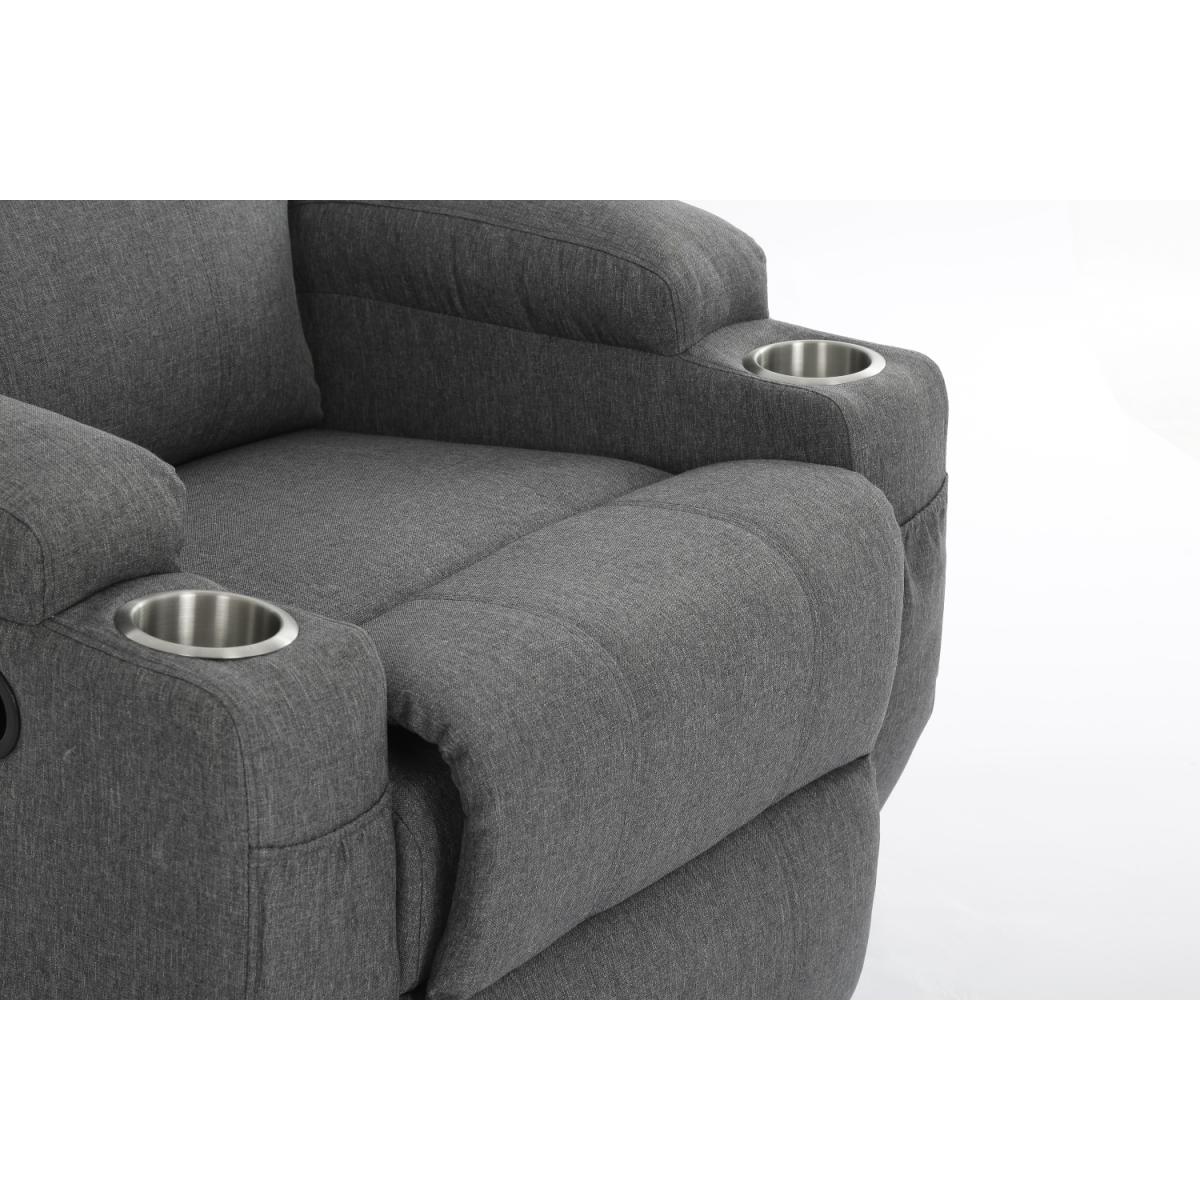 SILLON RECLINABLE/GLIDER GRIS